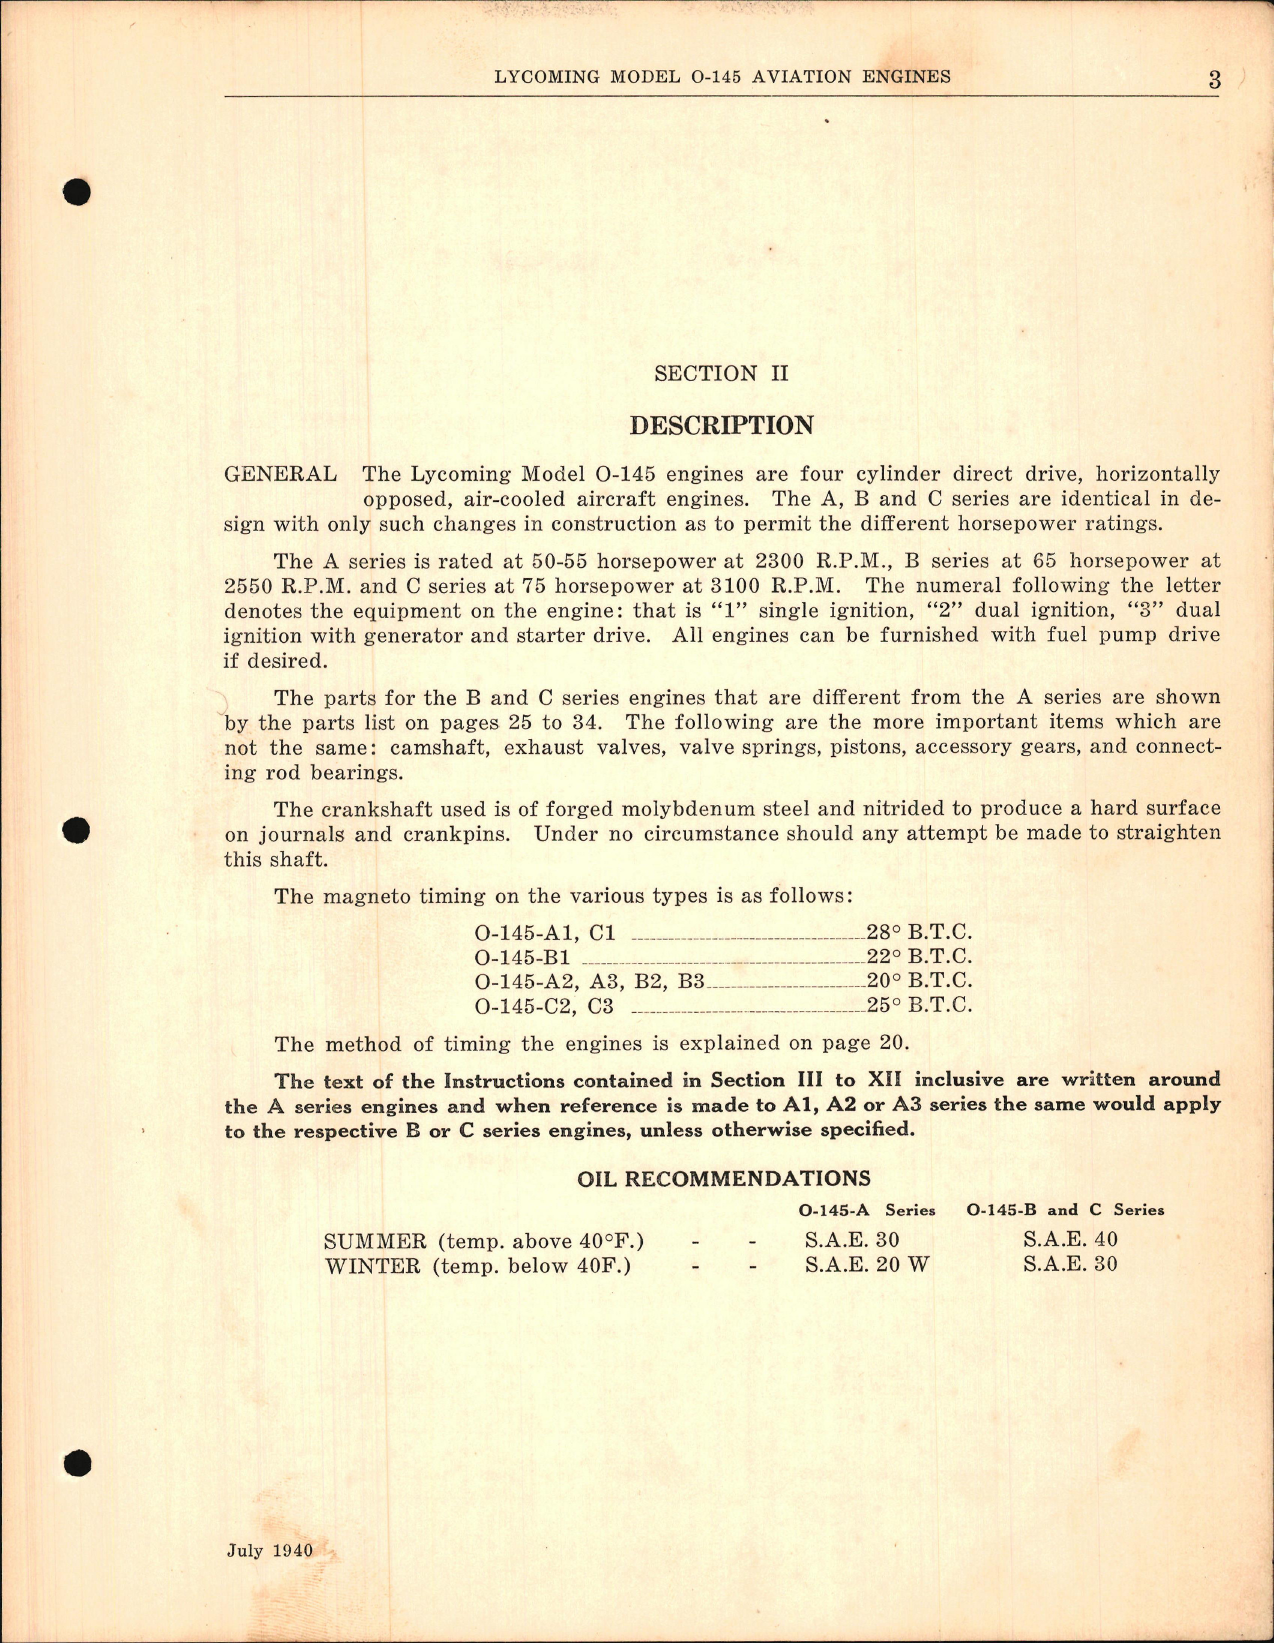 Sample page 7 from AirCorps Library document: Handbook of Instructions with Parts Catalog for Lycoming O-145 Engine